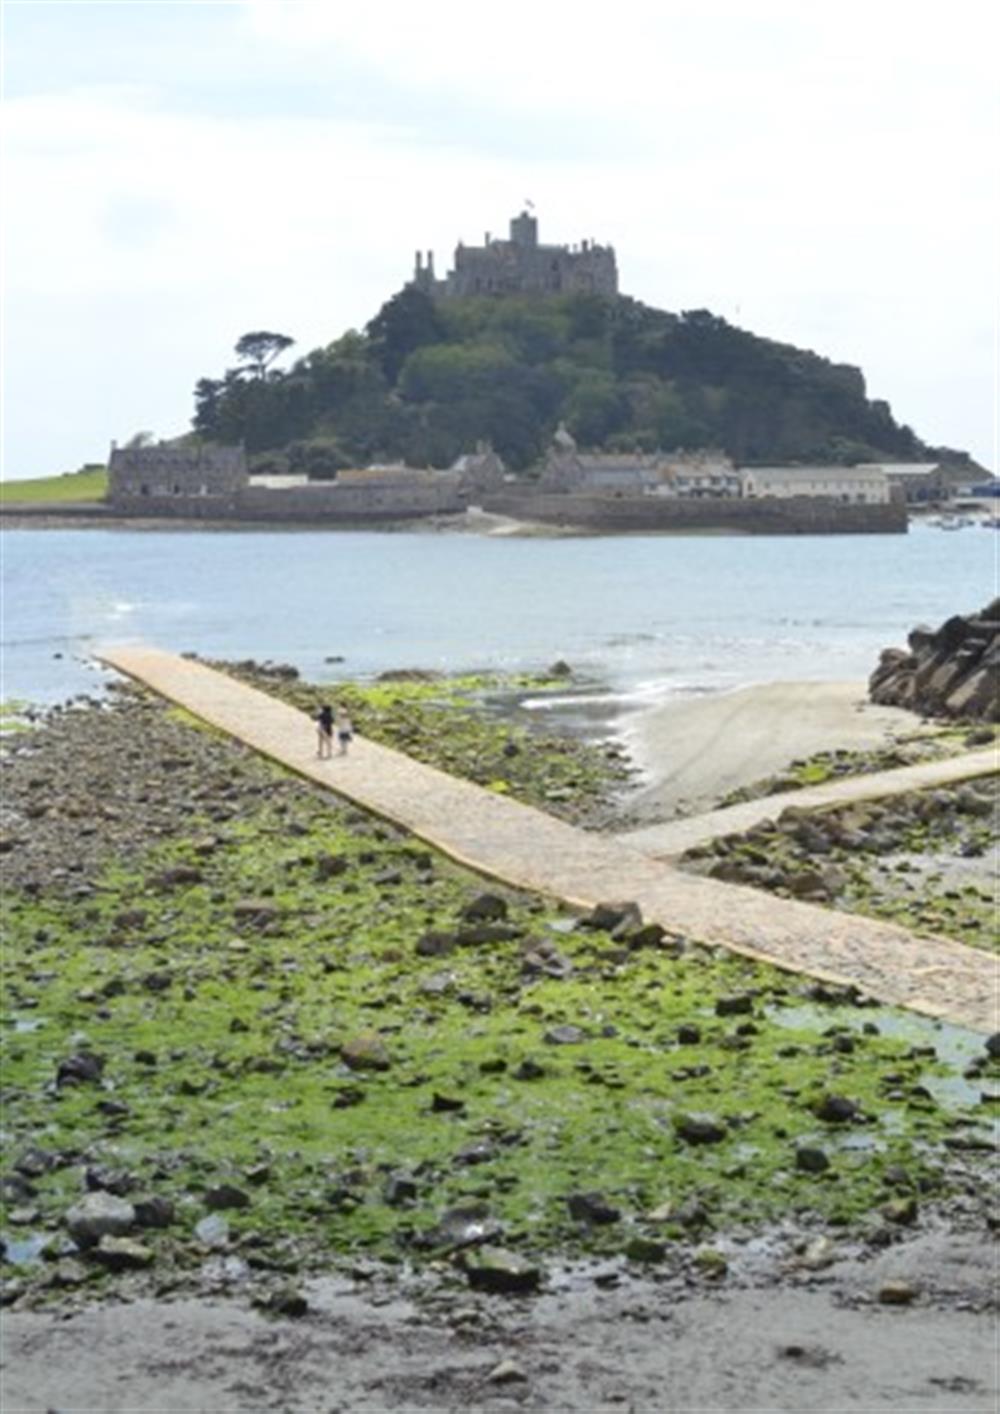 St Michael's Mount is just 45 minutes' away by car. at Riverside in Helford Passage